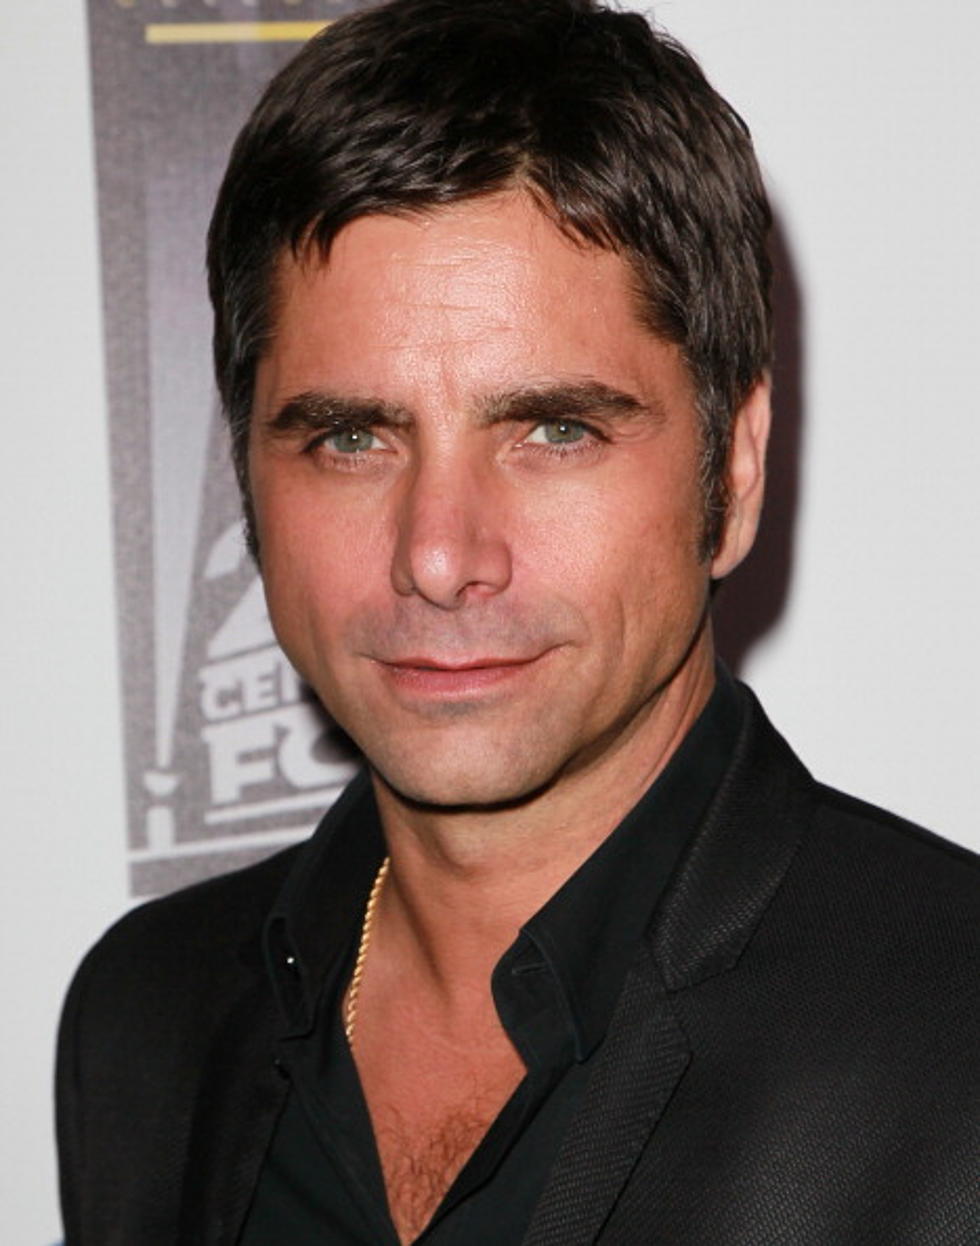 John Stamos To Replace Charlie Sheen?